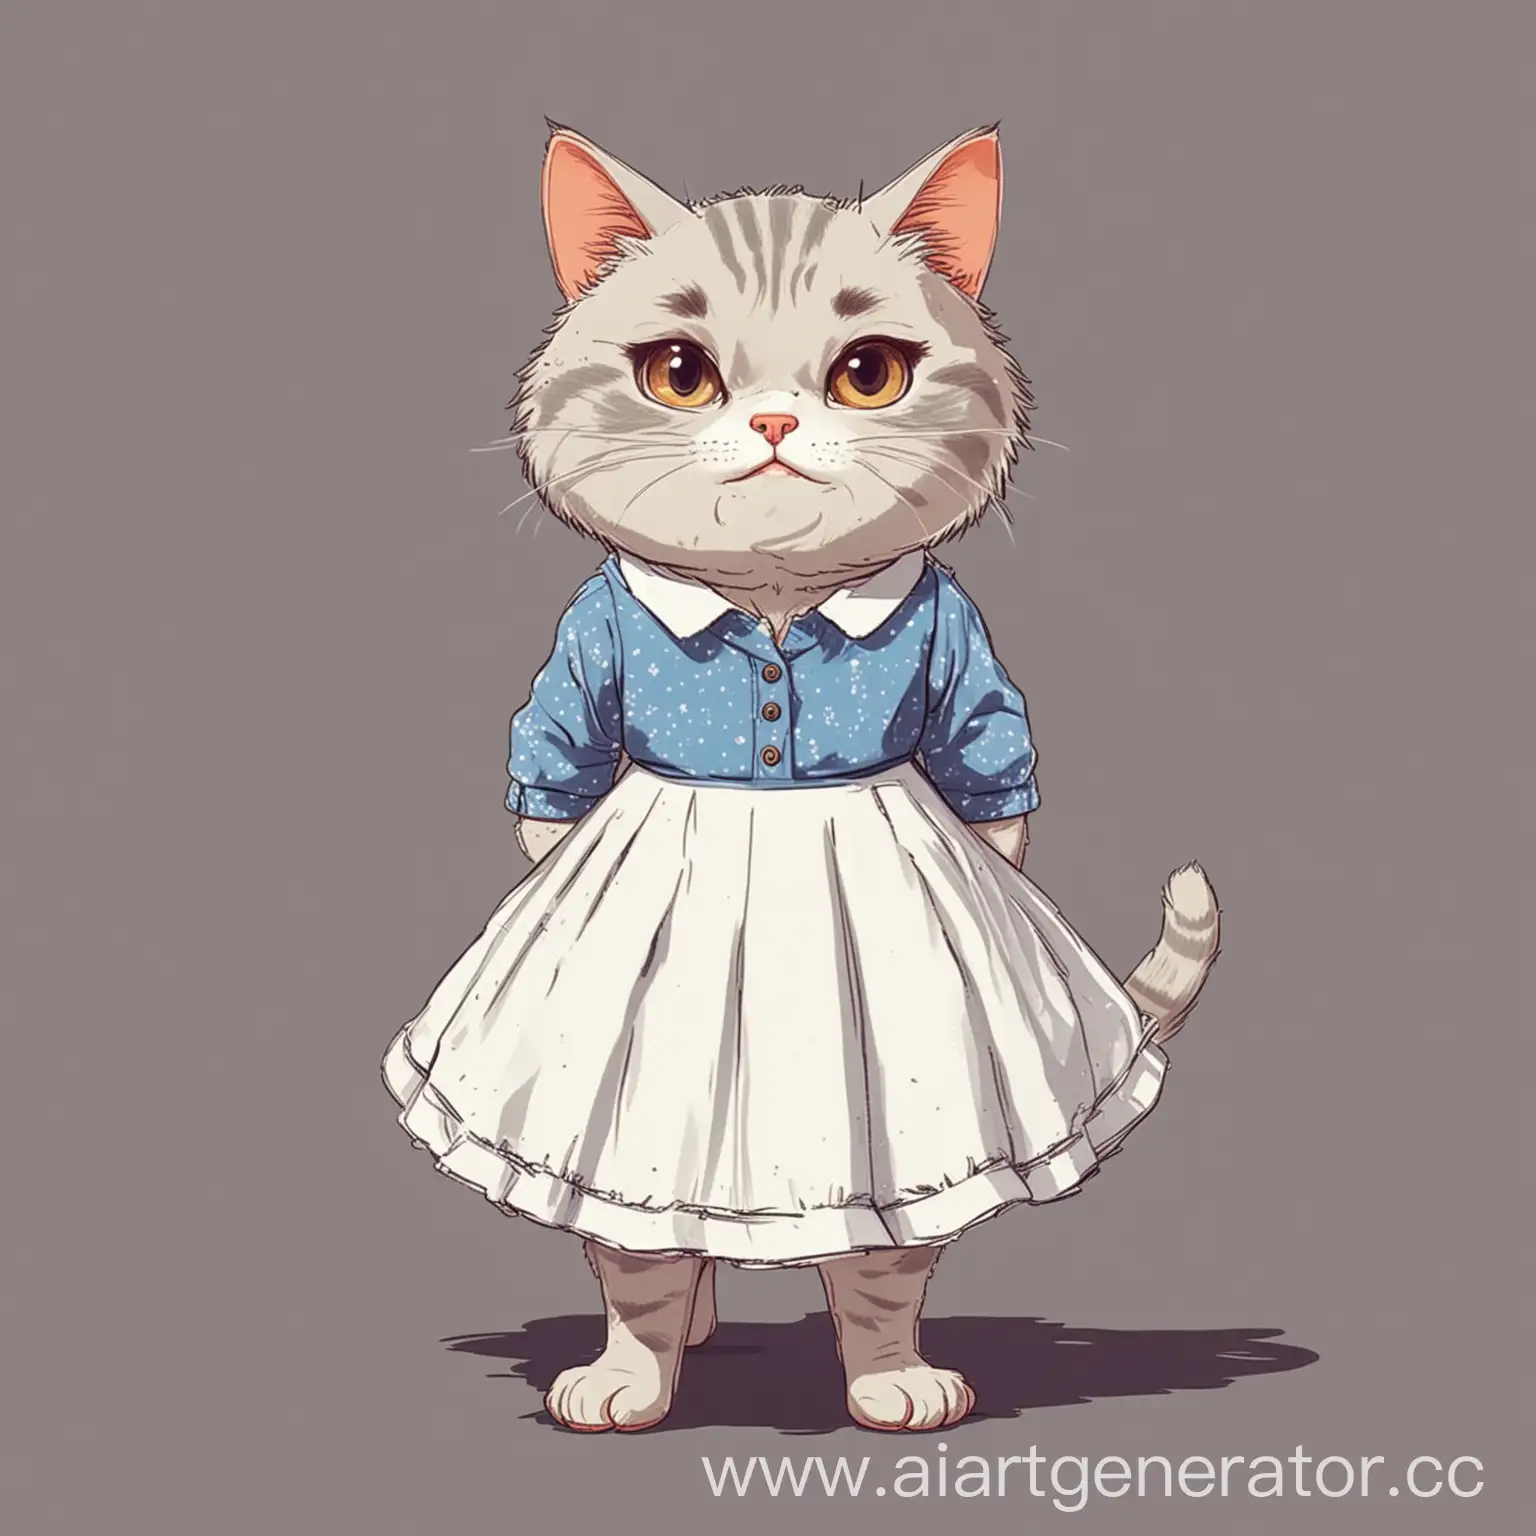 Business-Cat-Standing-in-Dress-in-Cartoon-Style